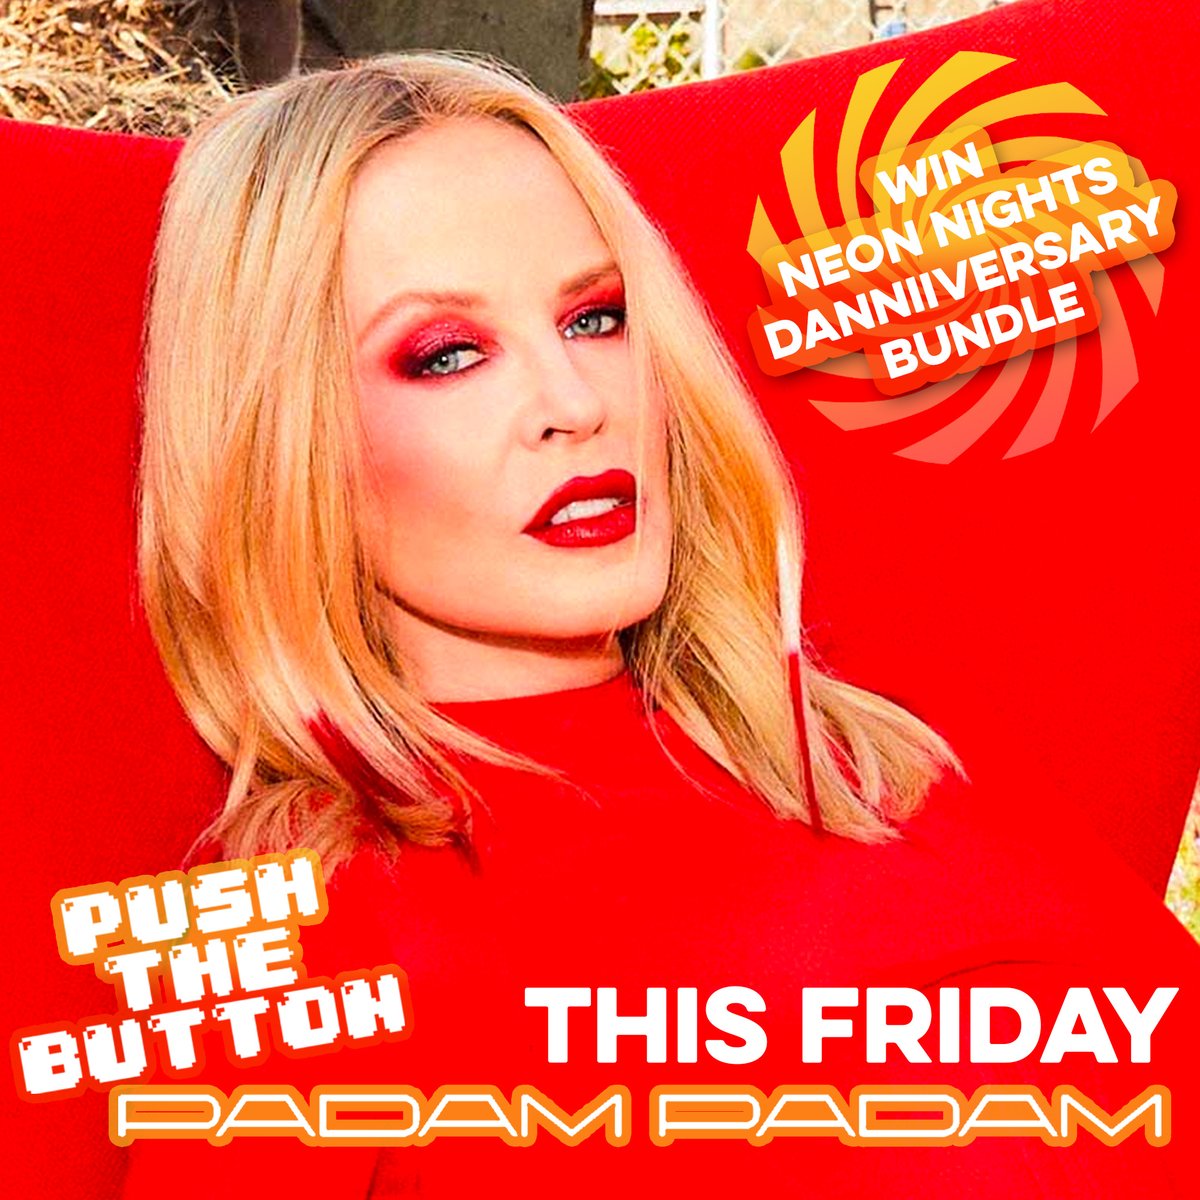 PADAM?

Join us at @thervt THIS FRIDAY as we go into MINOGUE-VERLOAD! 🦘🏳️‍🌈🏳️‍⚧️

Celebrating both the success of PADAM and #NeonNights20, DANNII MINOGUE has given Push The Button a deluxe CD + tote bundle to give away on the night!

Only a few tickets remain:
padam.eventbrite.co.uk